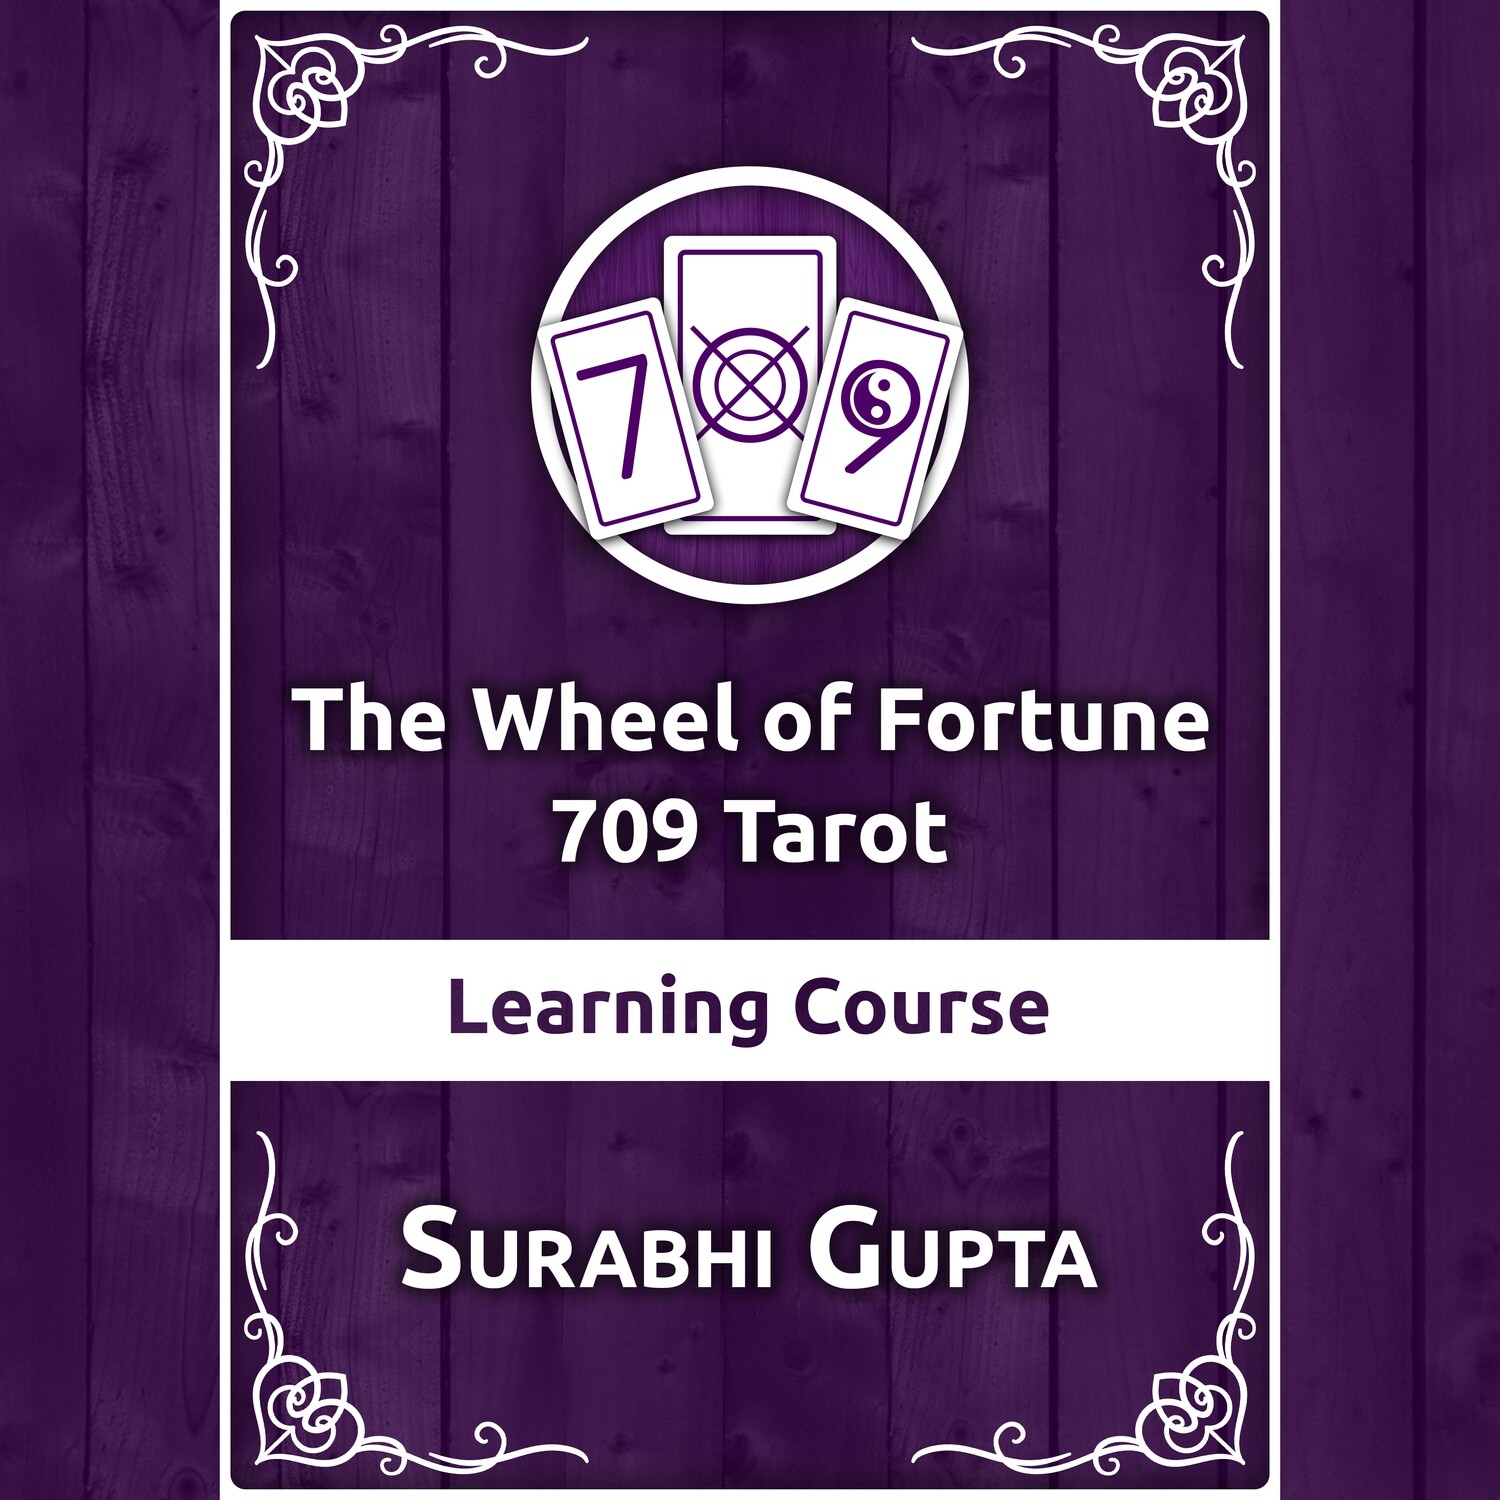 The Wheel of Fortune 709 Tarot Learning Course by Surabhi Gupta